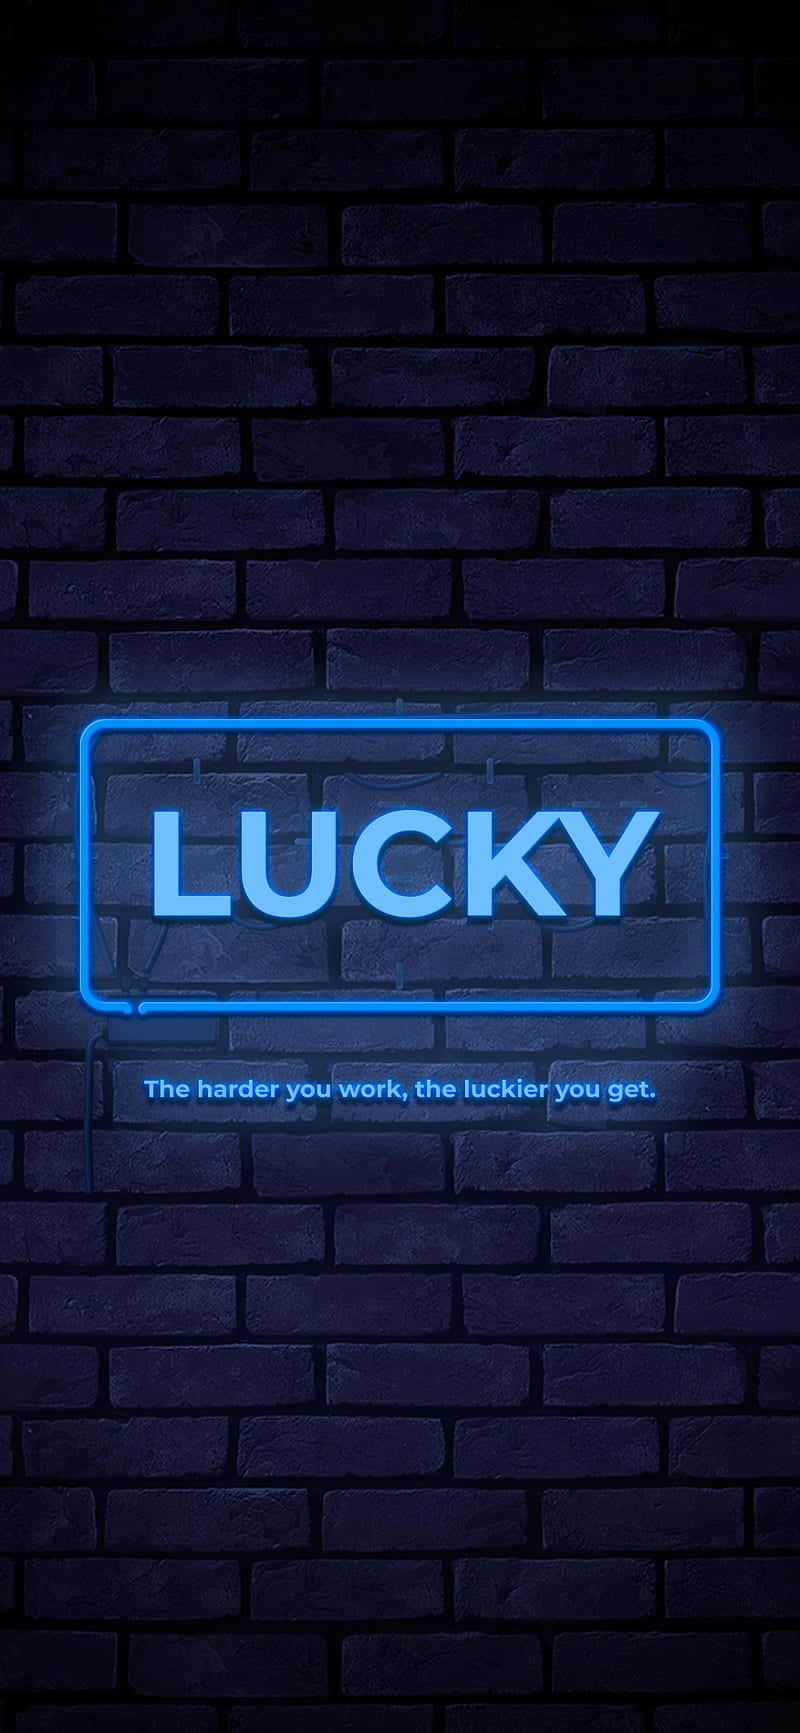 Try And Unlock This Clever Lock Screen Wallpaper